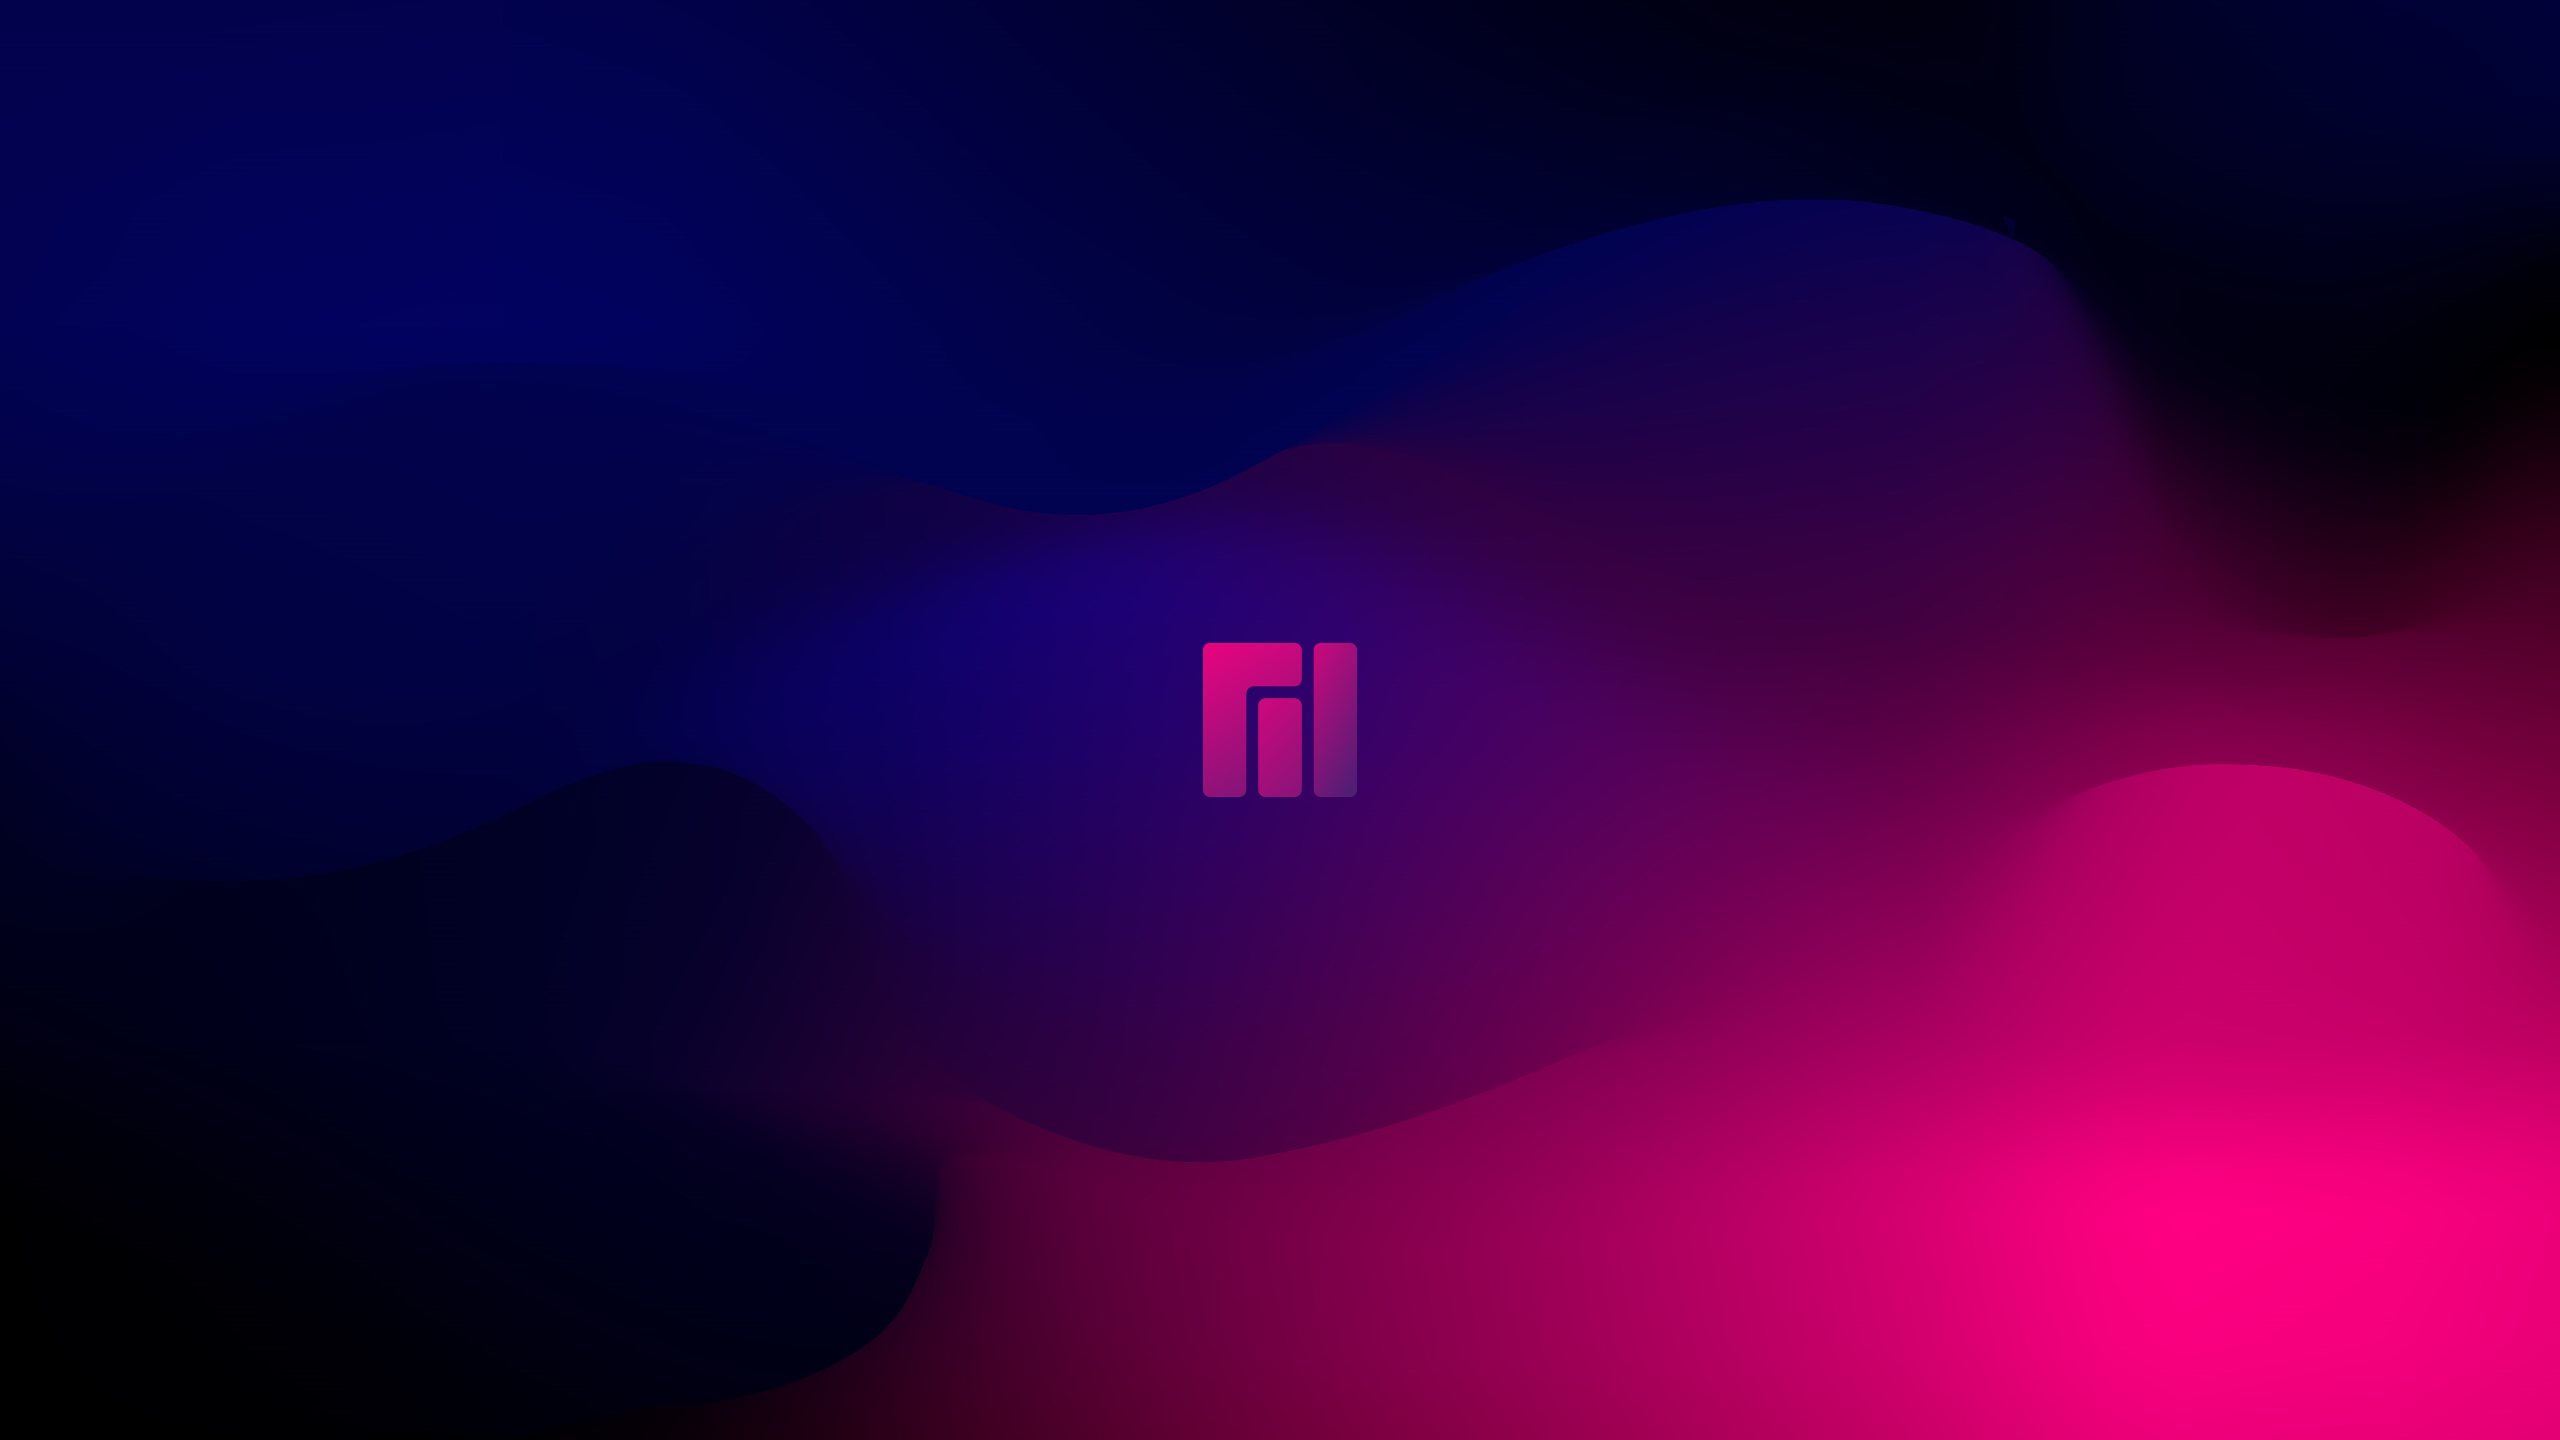 General 2560x1440 Manjaro Linux operating system abstract gradient minimalism simple background logo